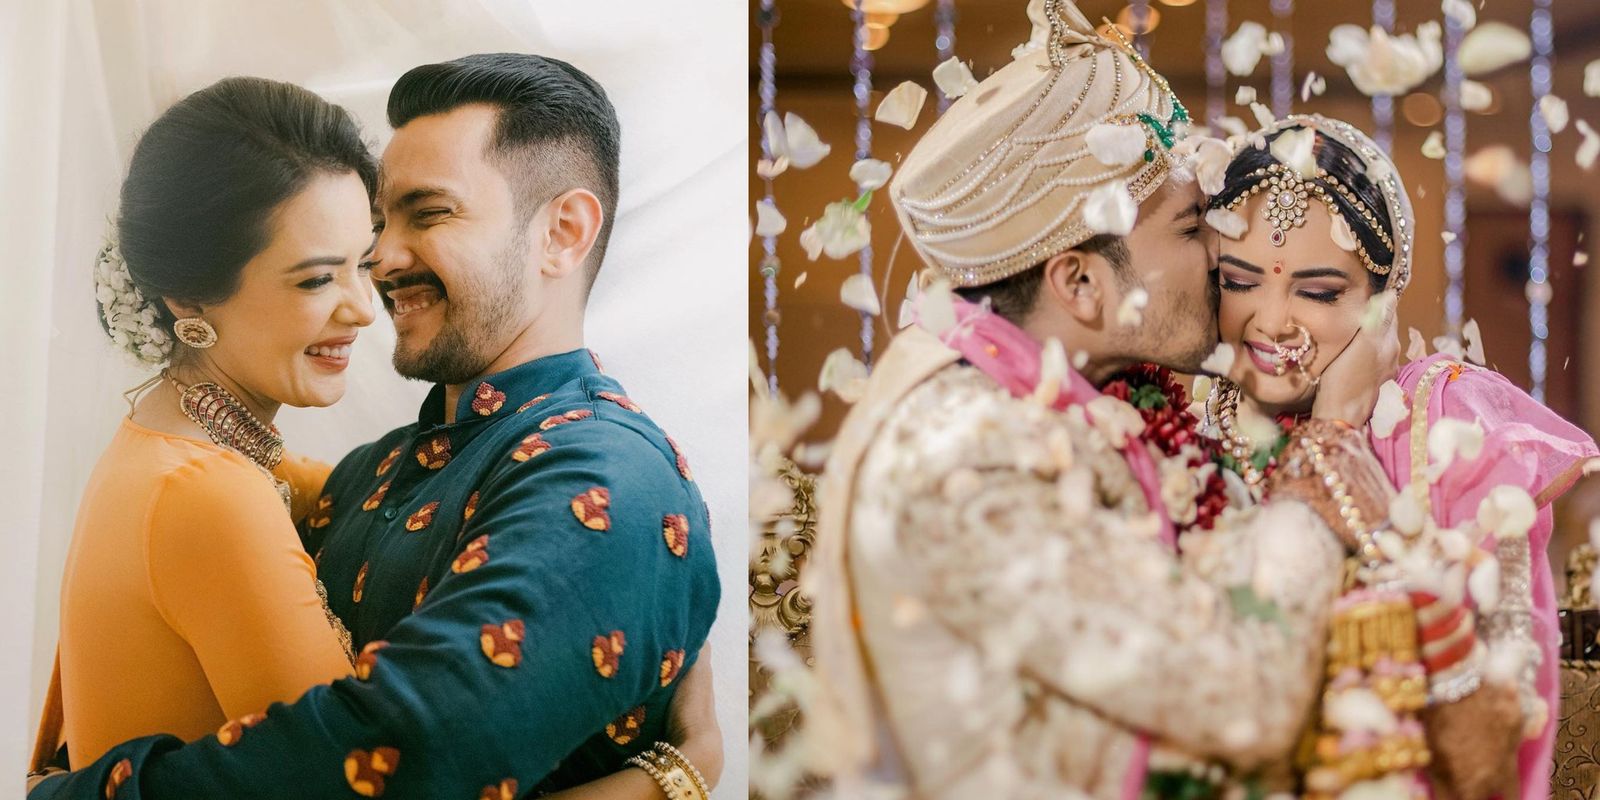 Aditya Narayan On Tying The Knot With Shweta Agarwal: “Took Weeks To Prepare And Then Celebrations Just Flew By”